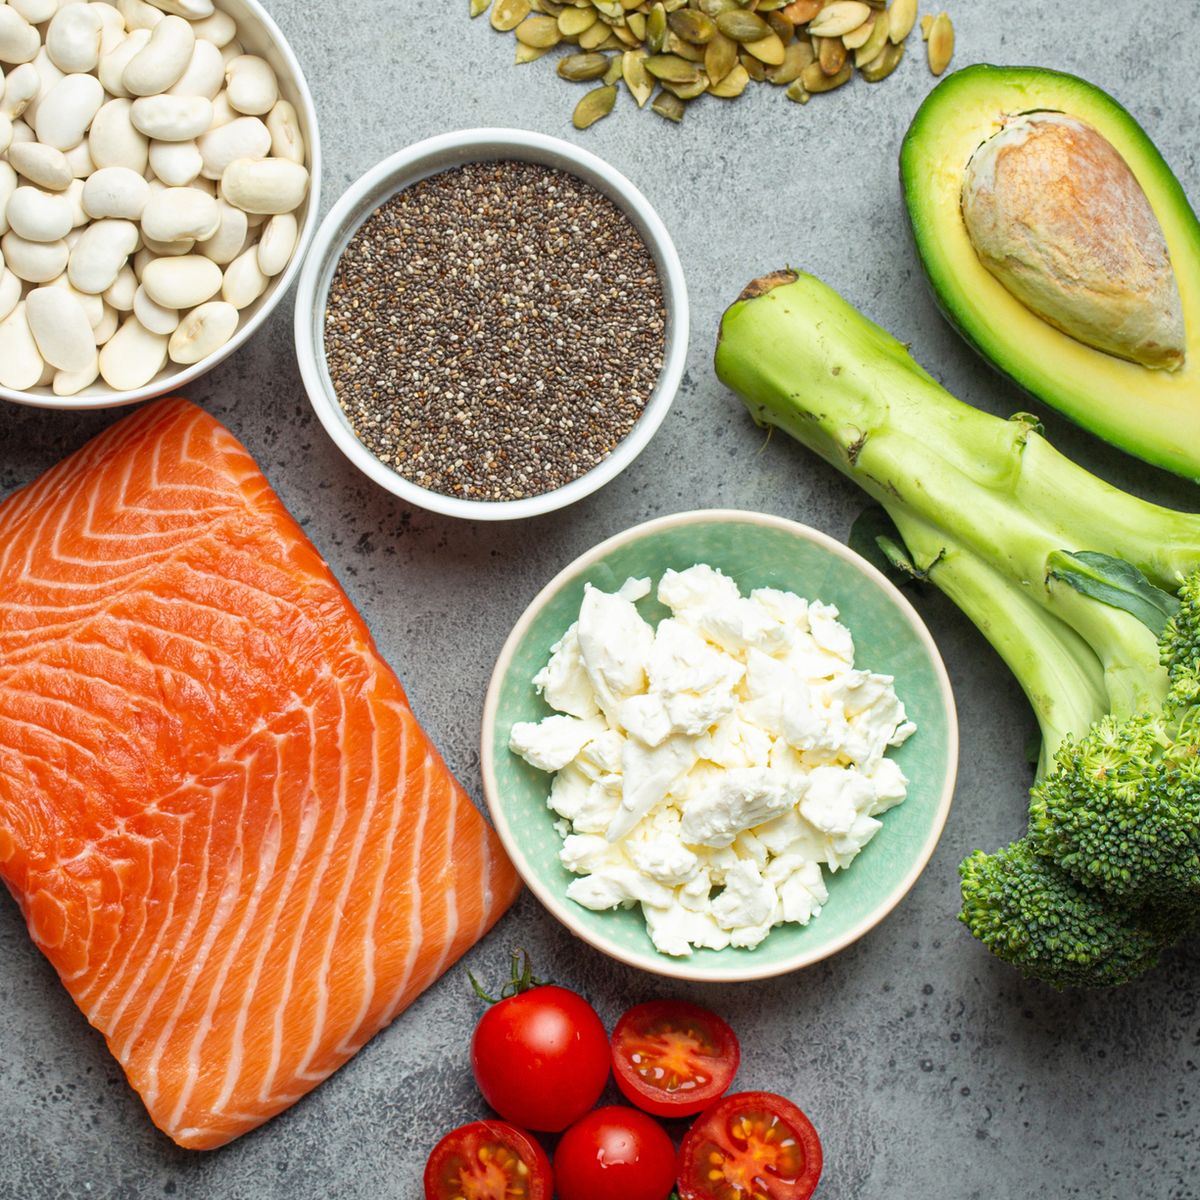 selection of healthy food products if a person have diabetes salmon fish, broccoli, avocado, beans, vegetables, seeds on grey background from above healthy diabetes diet